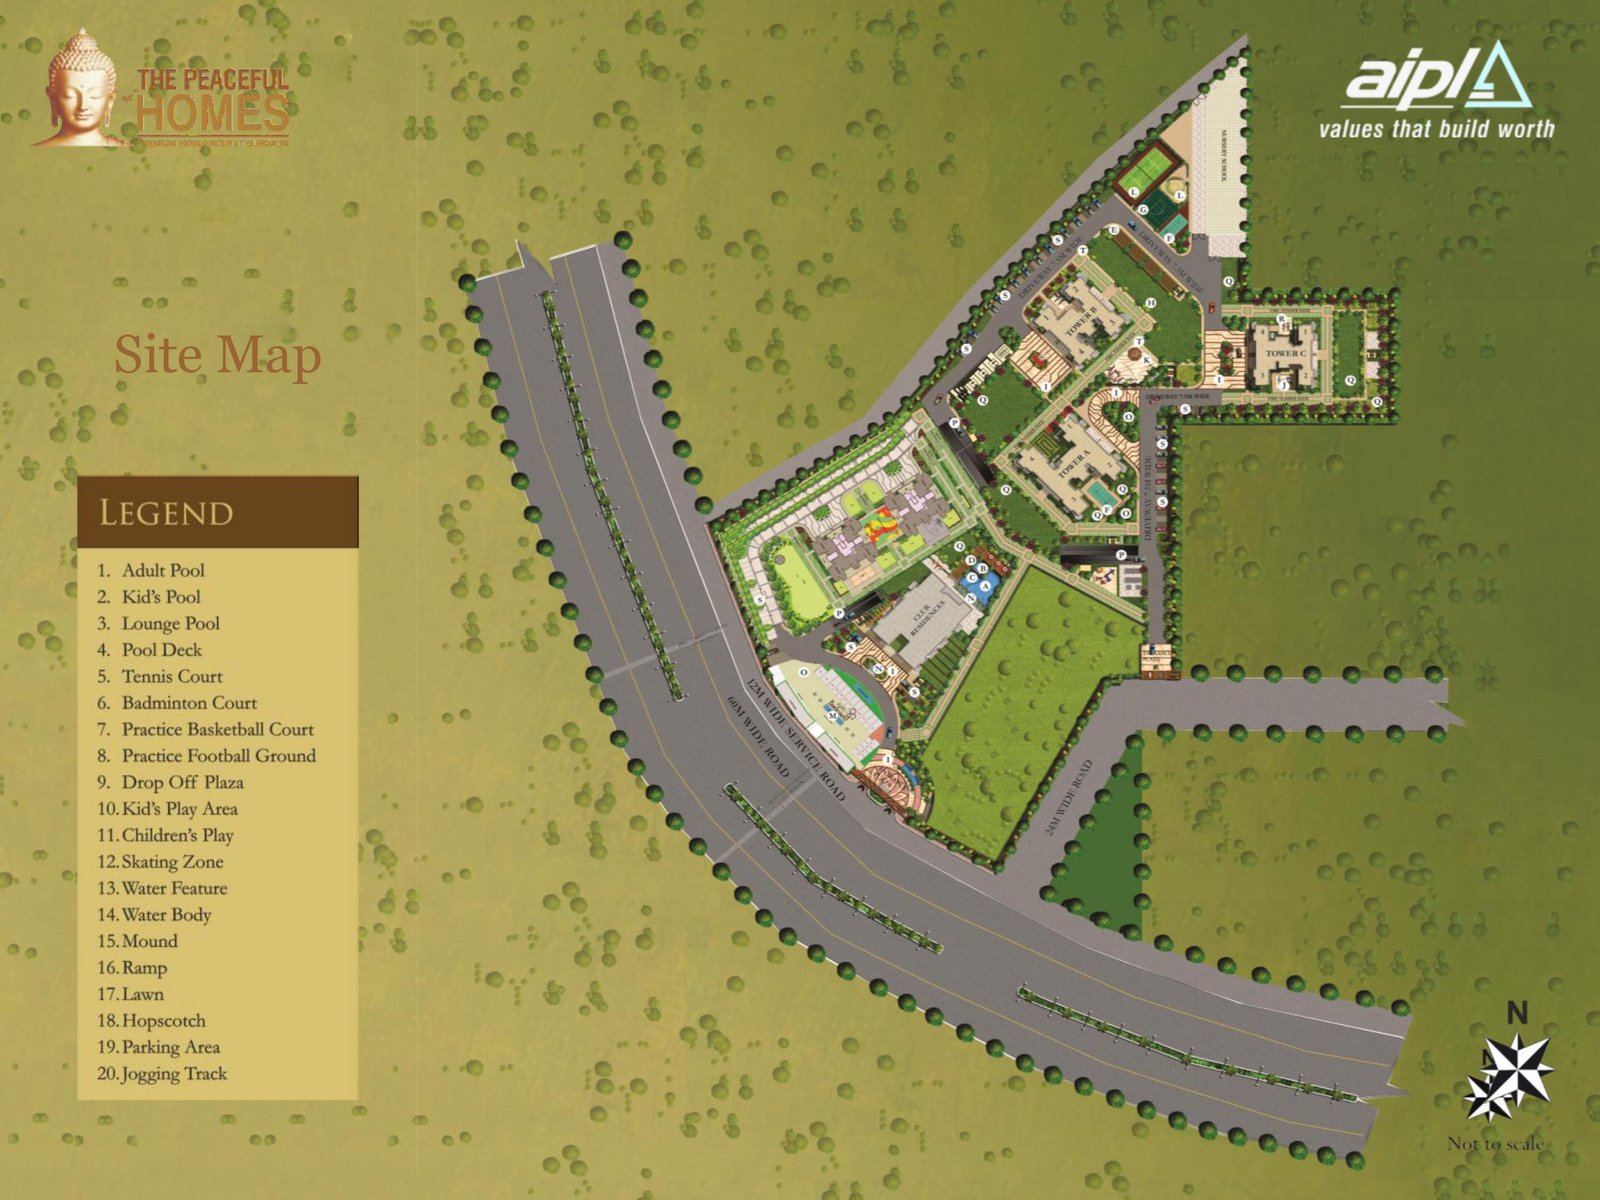 AIPL The Peaceful Homes Site Map